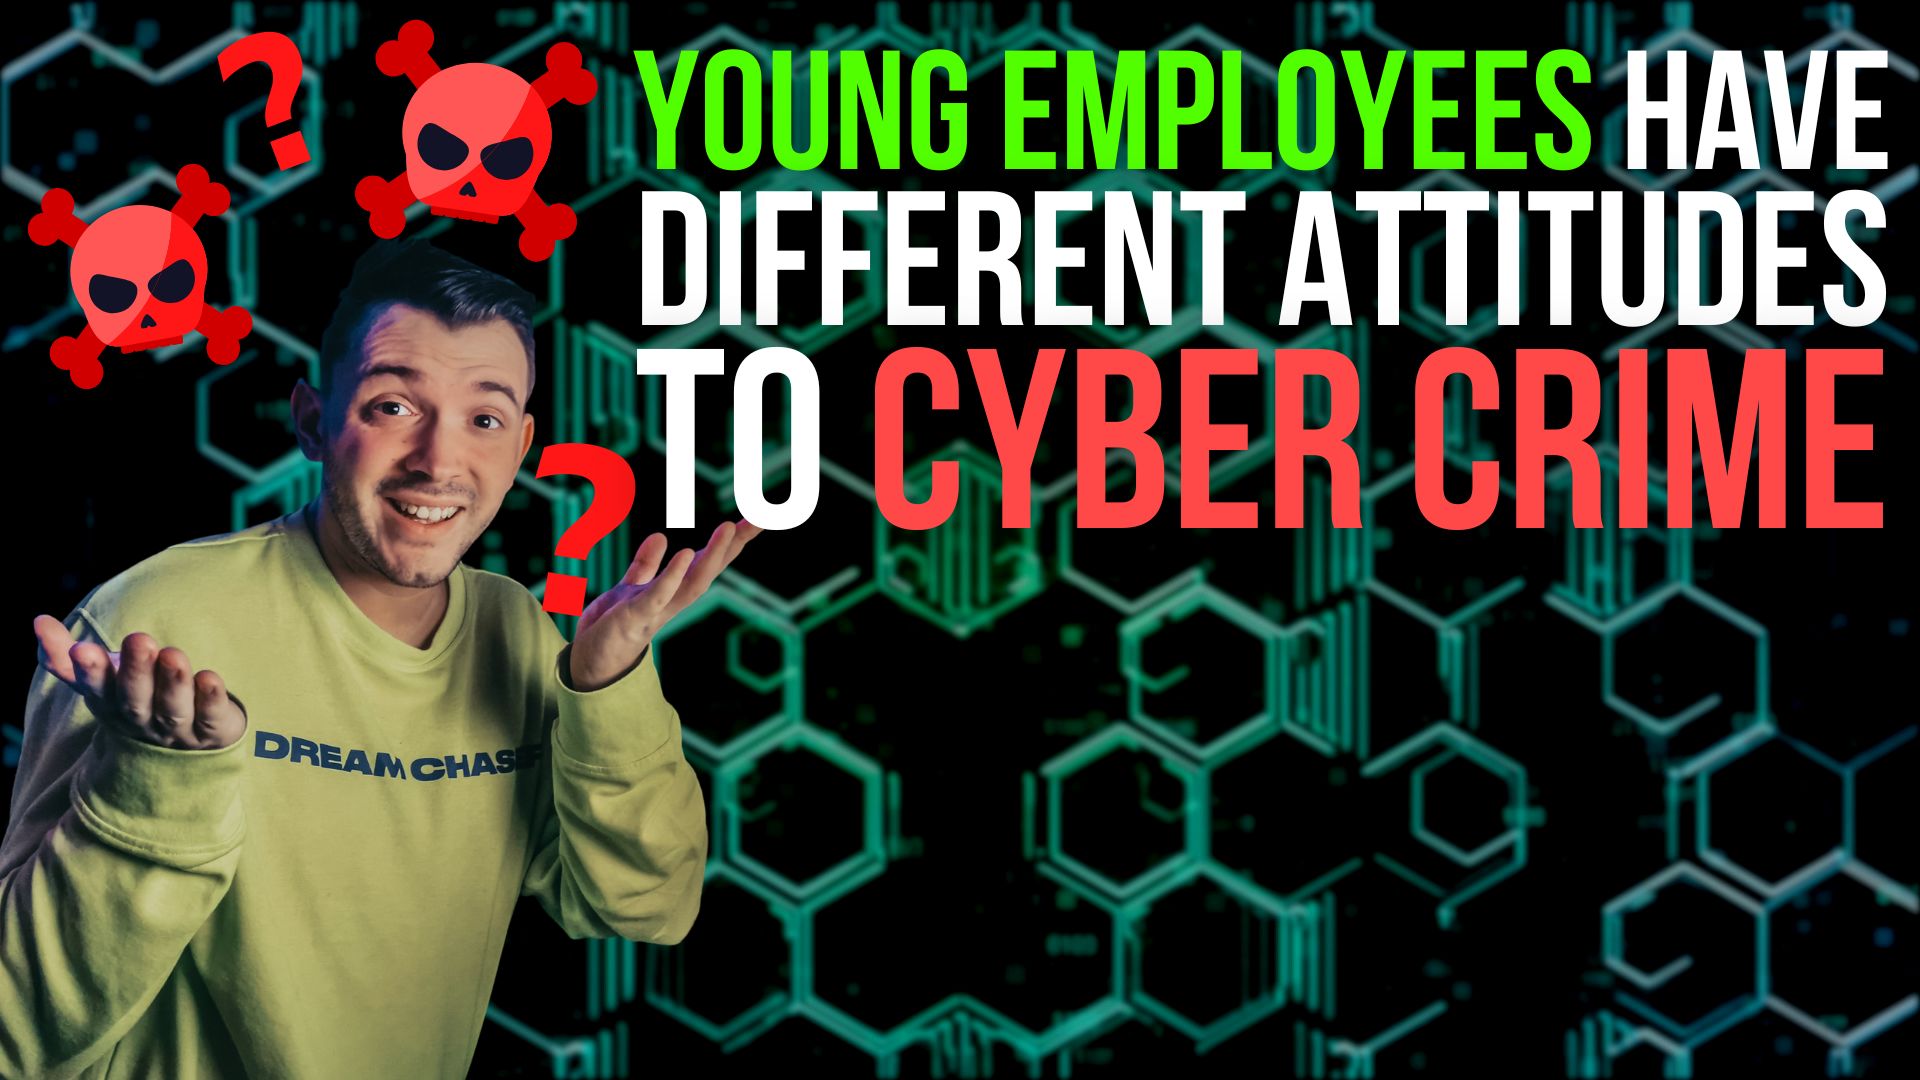 Cybercrime and young employees